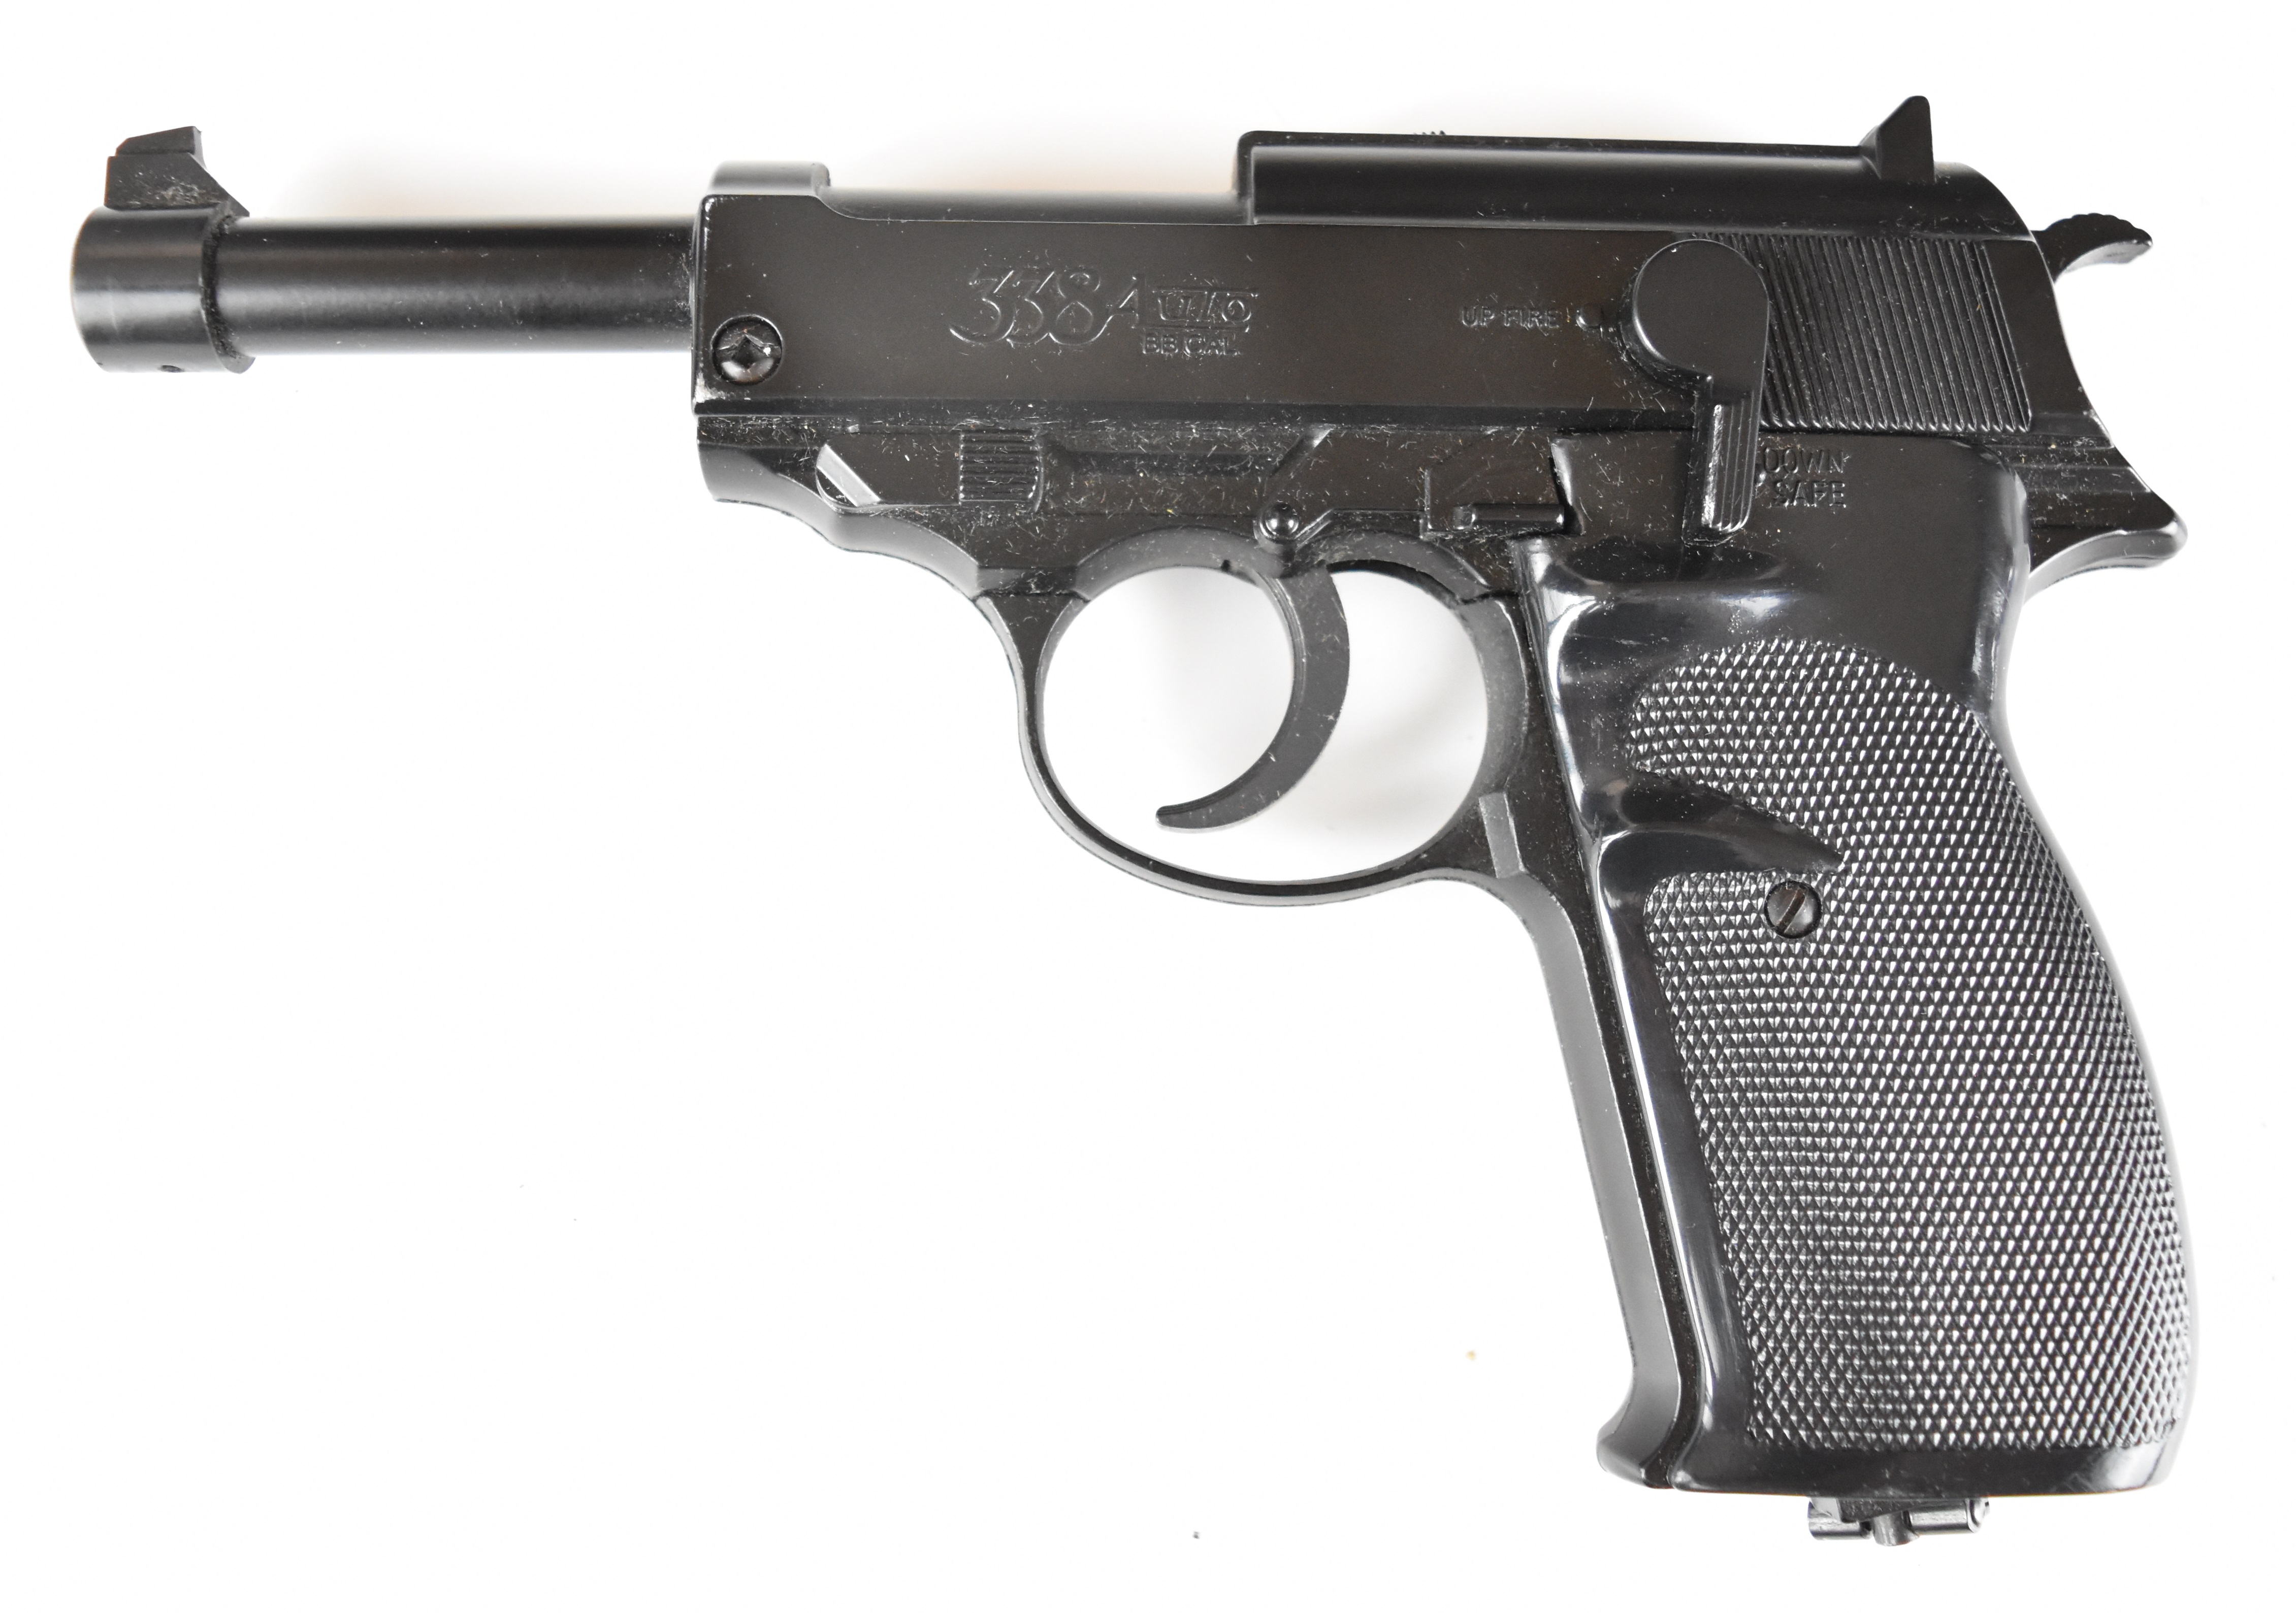 Two CO2 air pistols Daisy Model 2003 35-shot repeater .177 with chequered composite grips and - Image 2 of 14